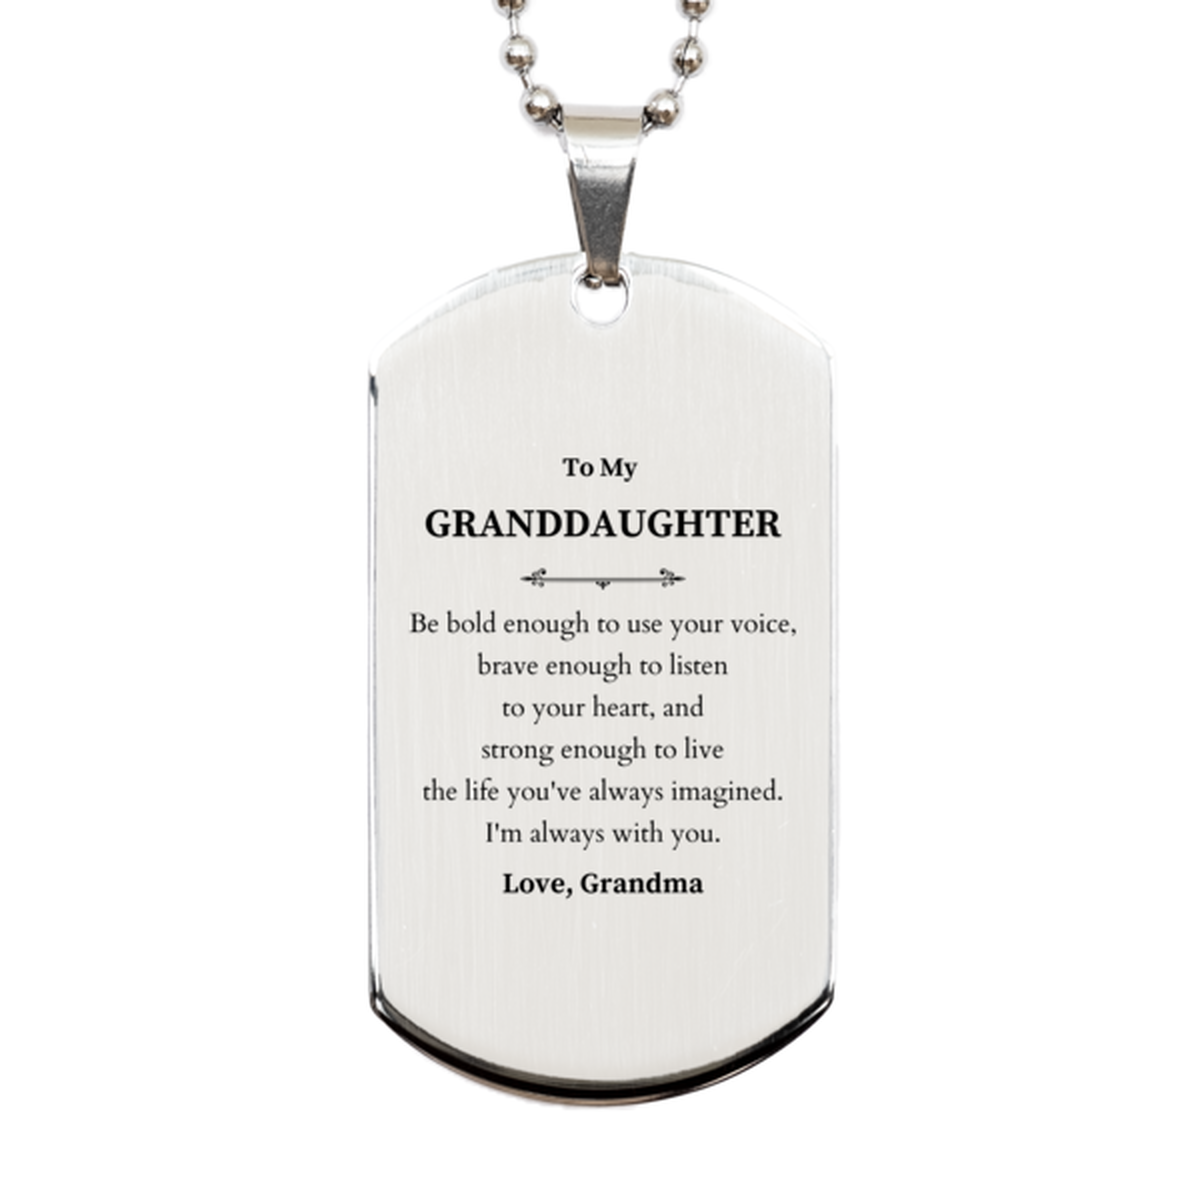 Keepsake Granddaughter Silver Dog Tag Gift Idea Graduation Christmas Birthday Granddaughter from Grandma, Granddaughter Be bold enough to use your voice, brave enough to listen to your heart. Love, Grandma